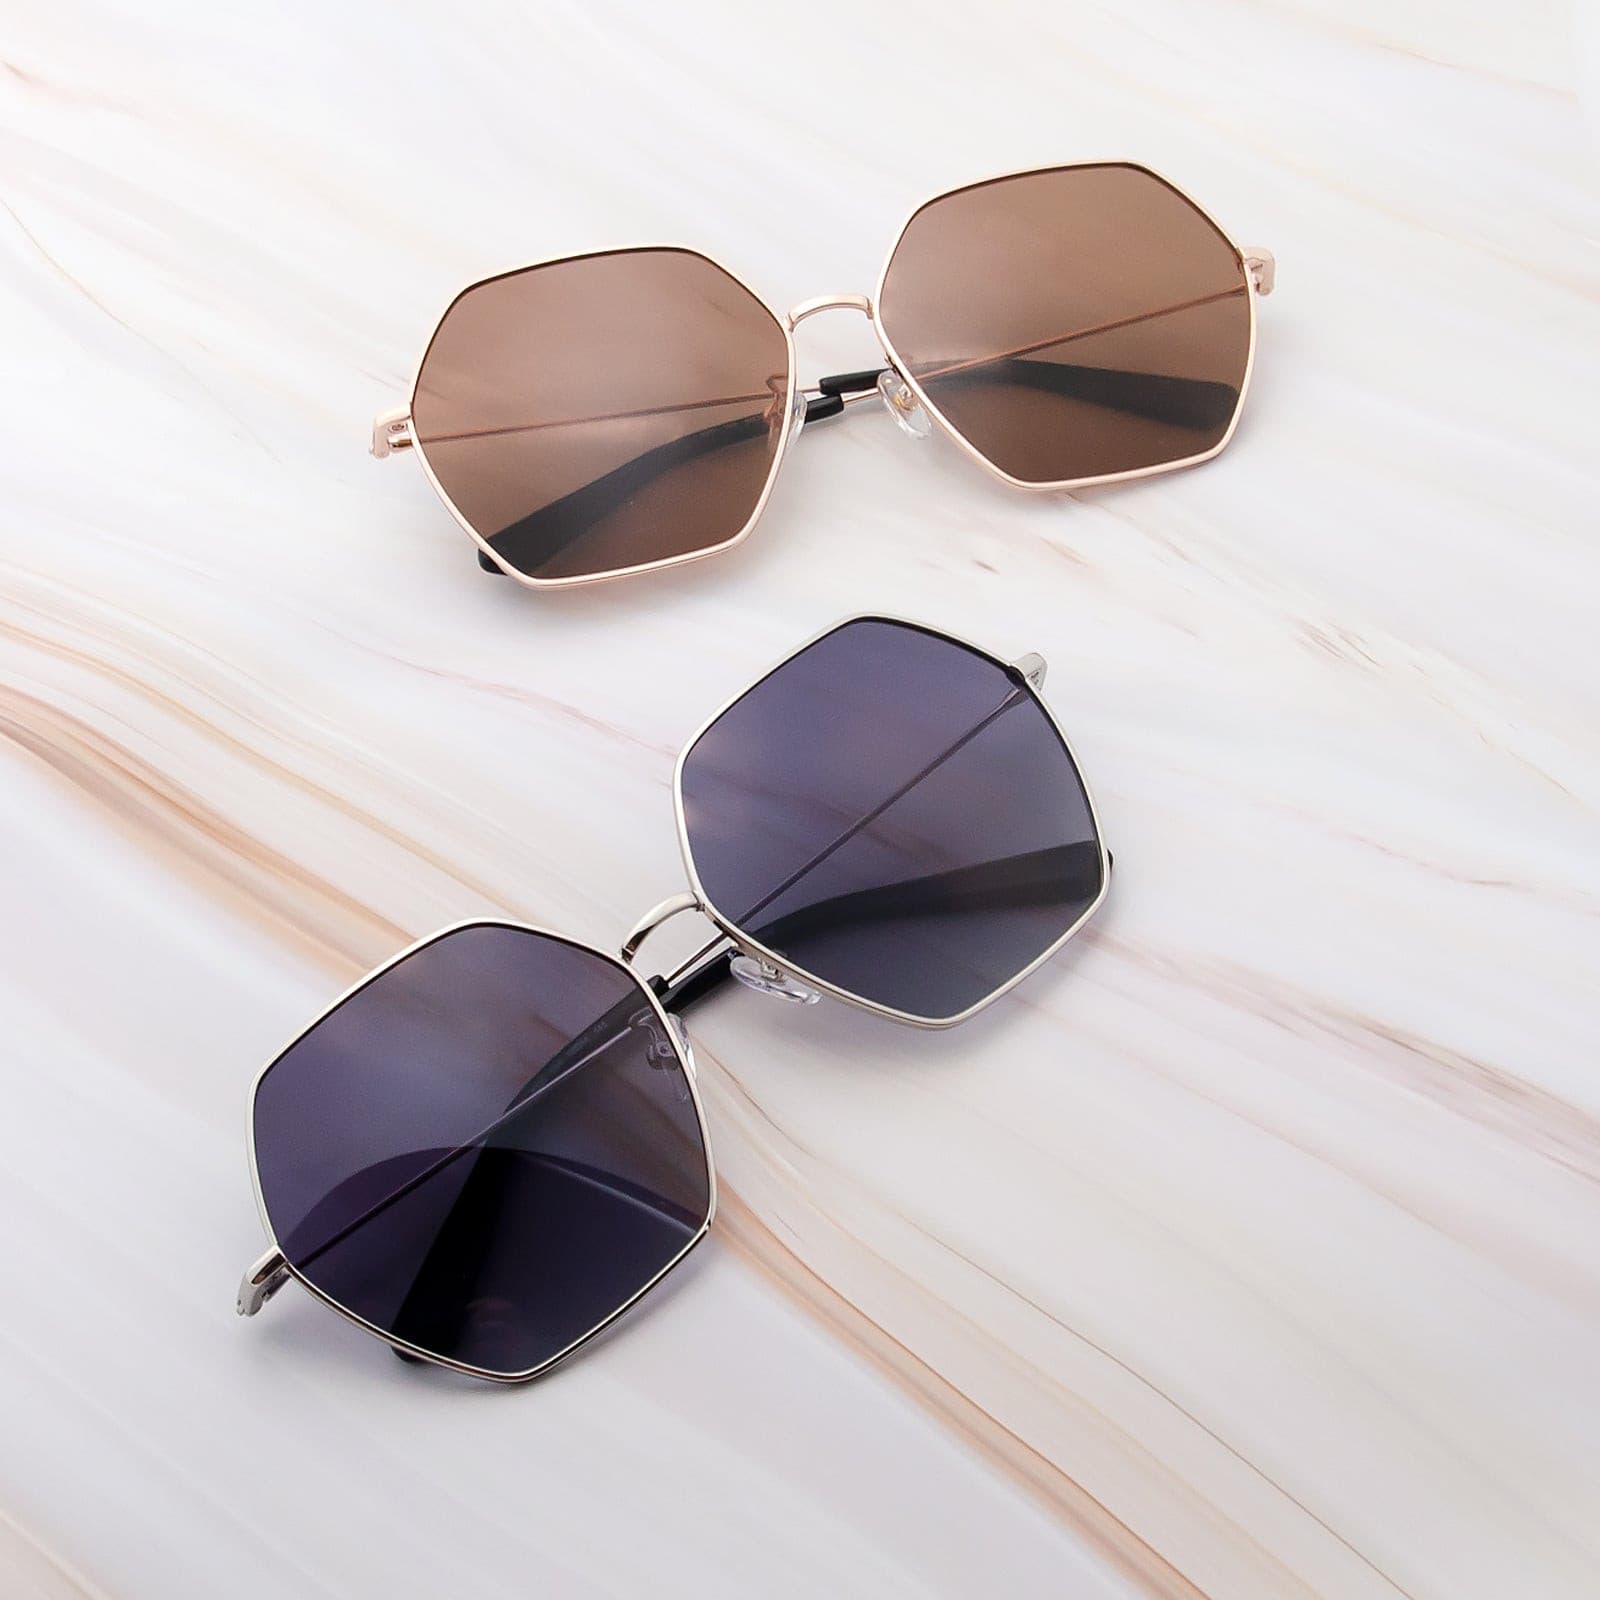 Luca | NextPair, DTC sunglasses designed for Asians from $78